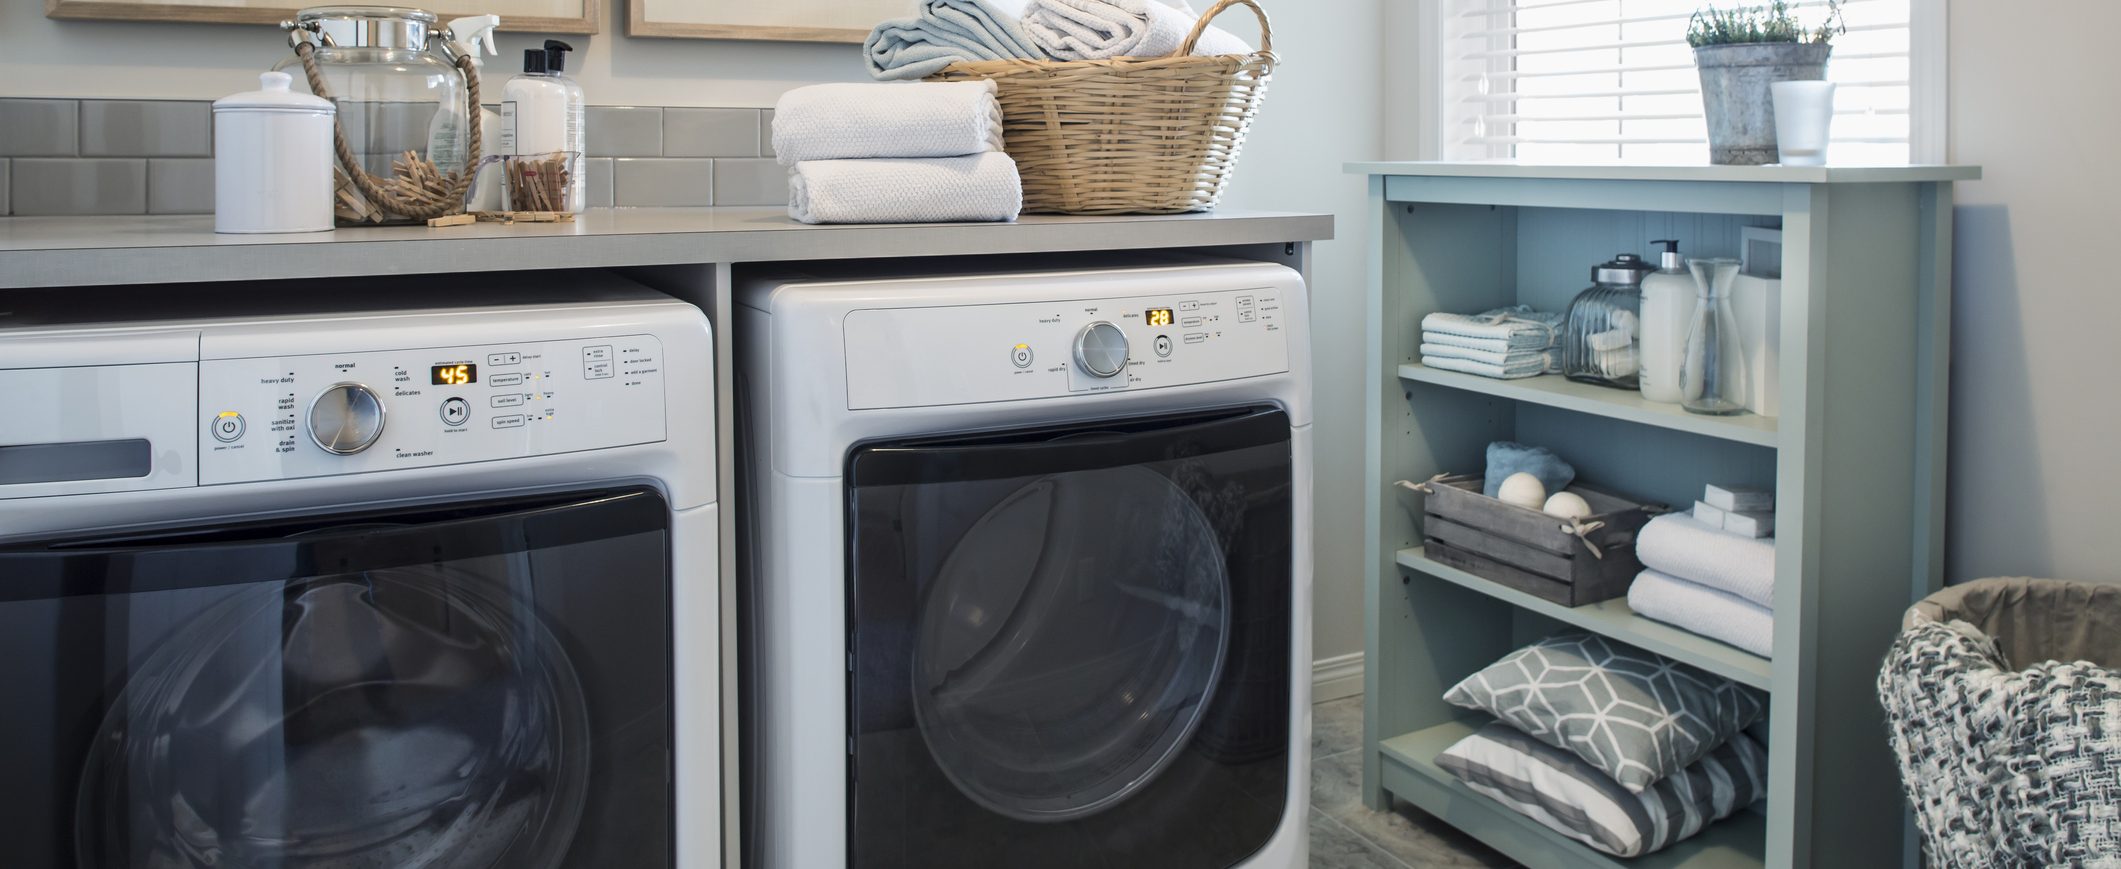 Buying a high-end appliance can help you save on repairs down the road